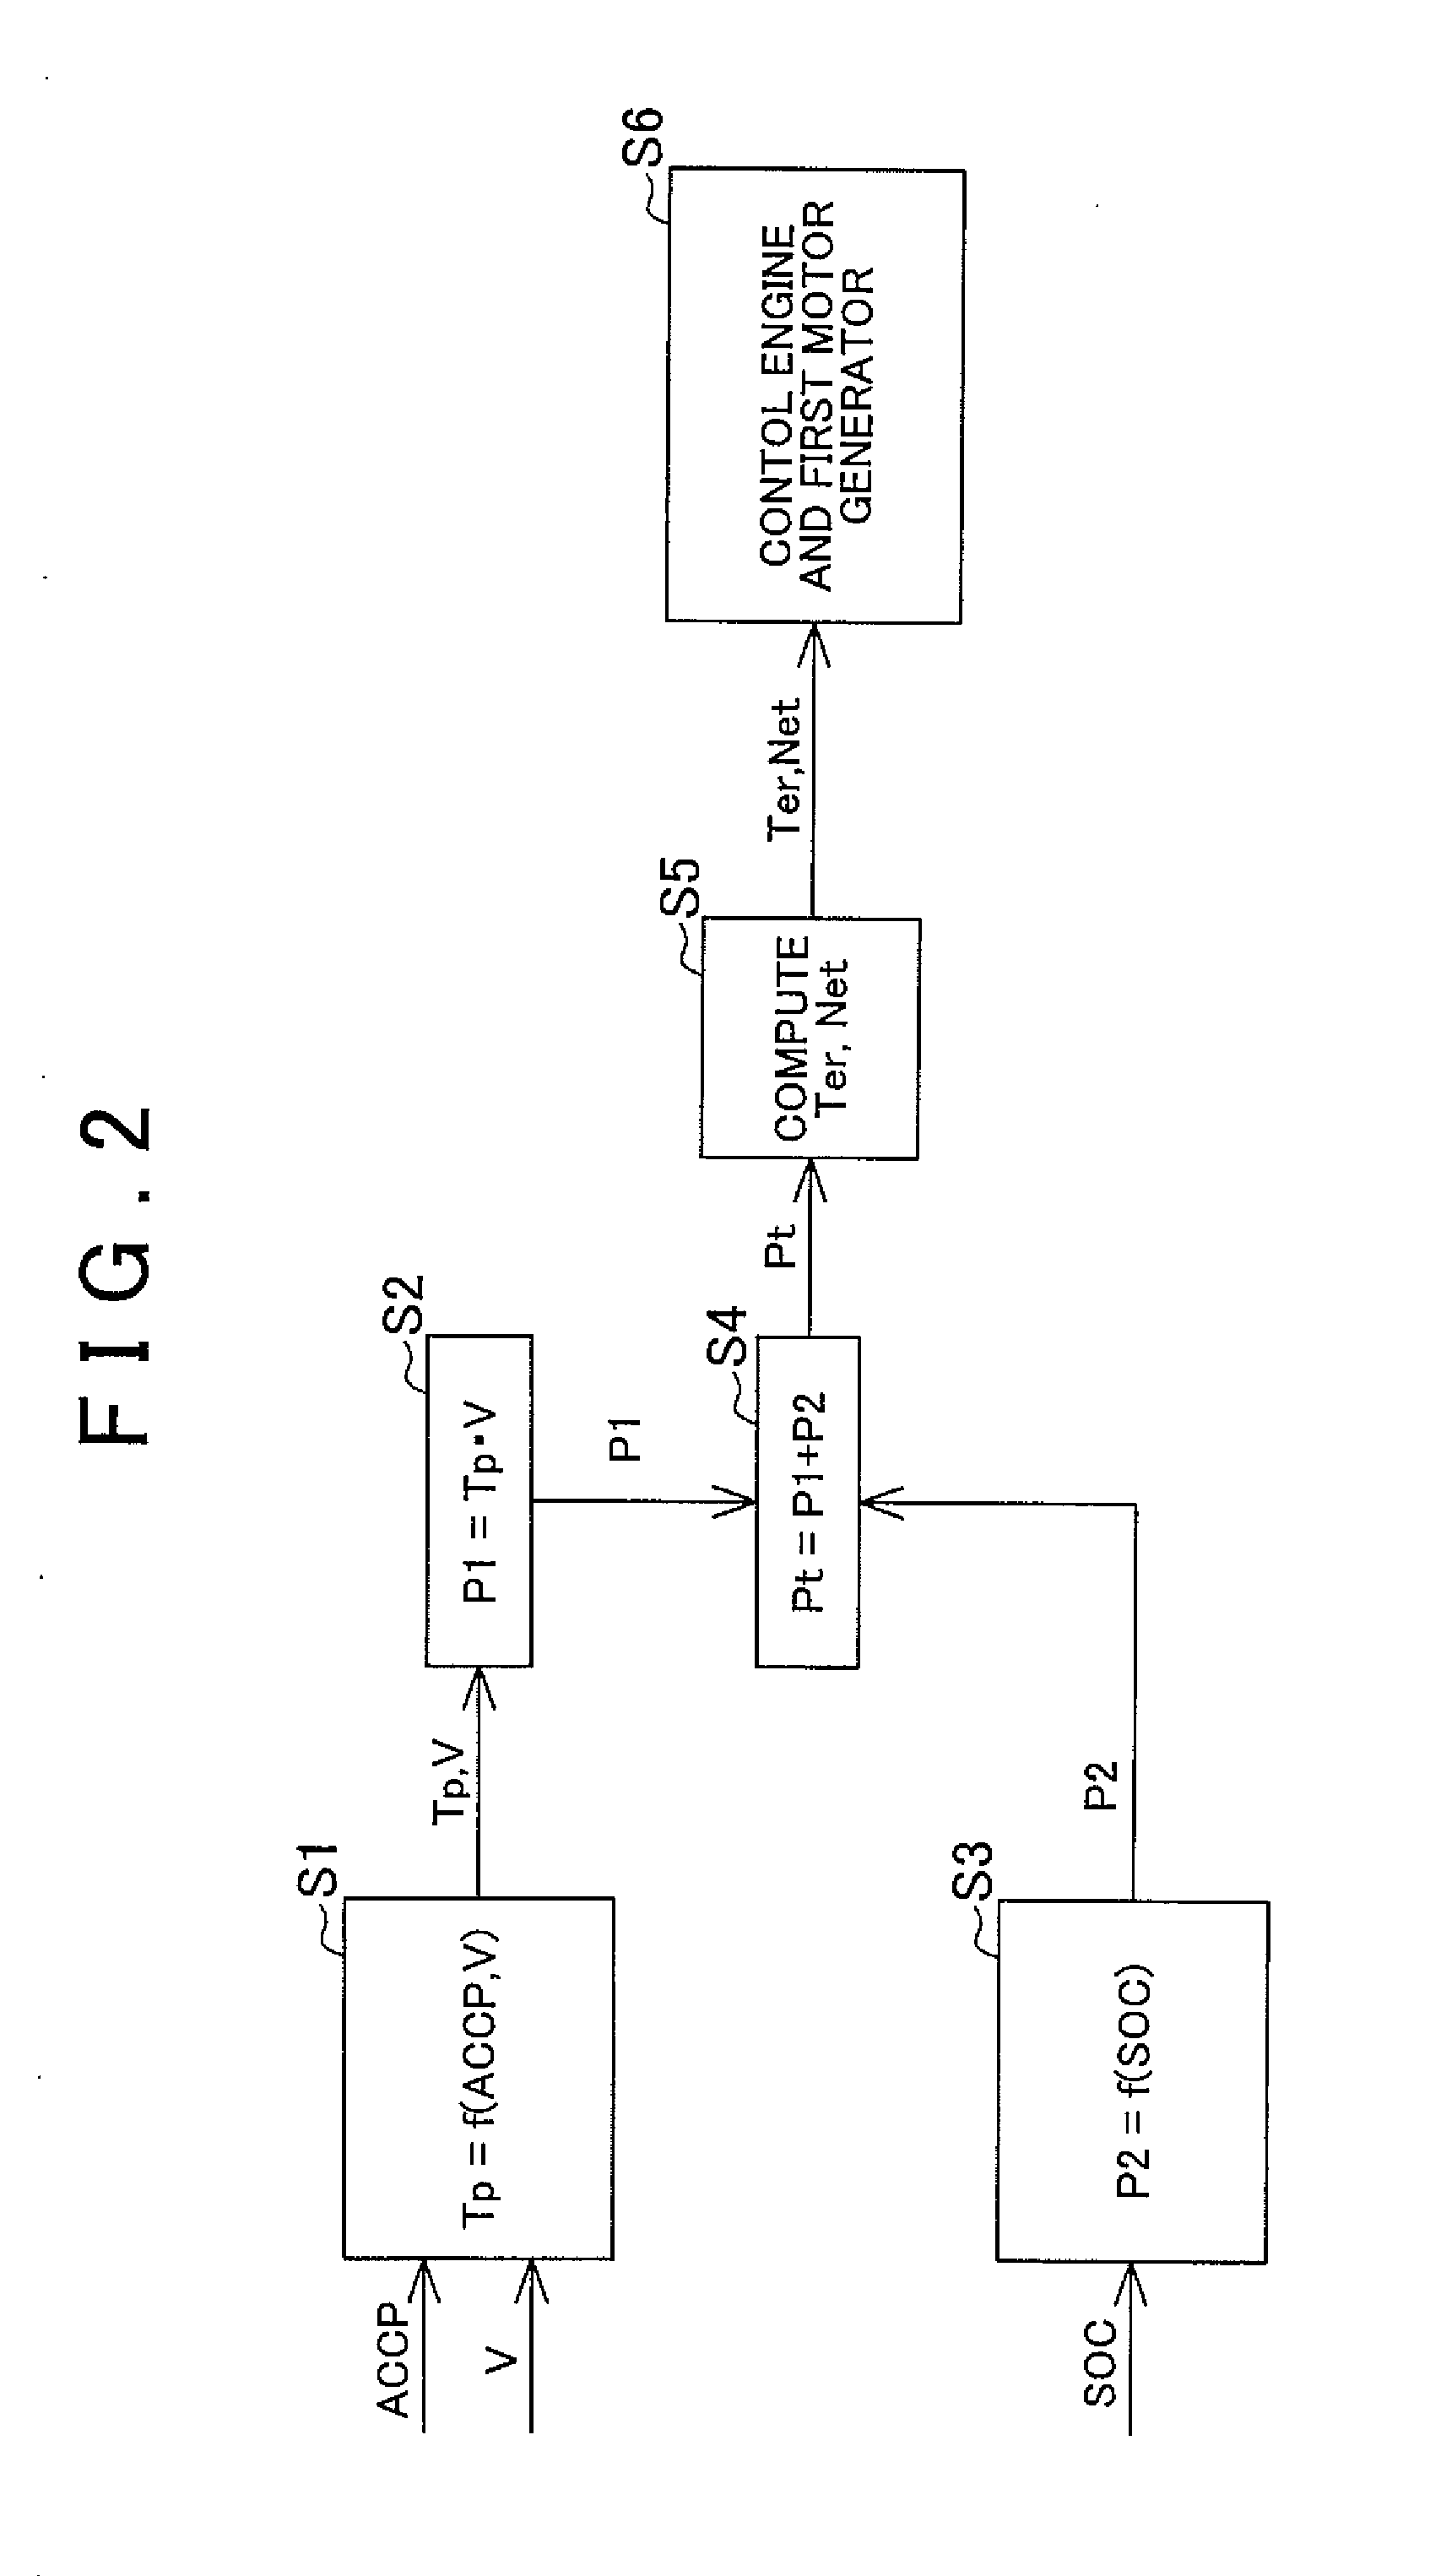 Control device, control method, and control system for hybrid vehicle